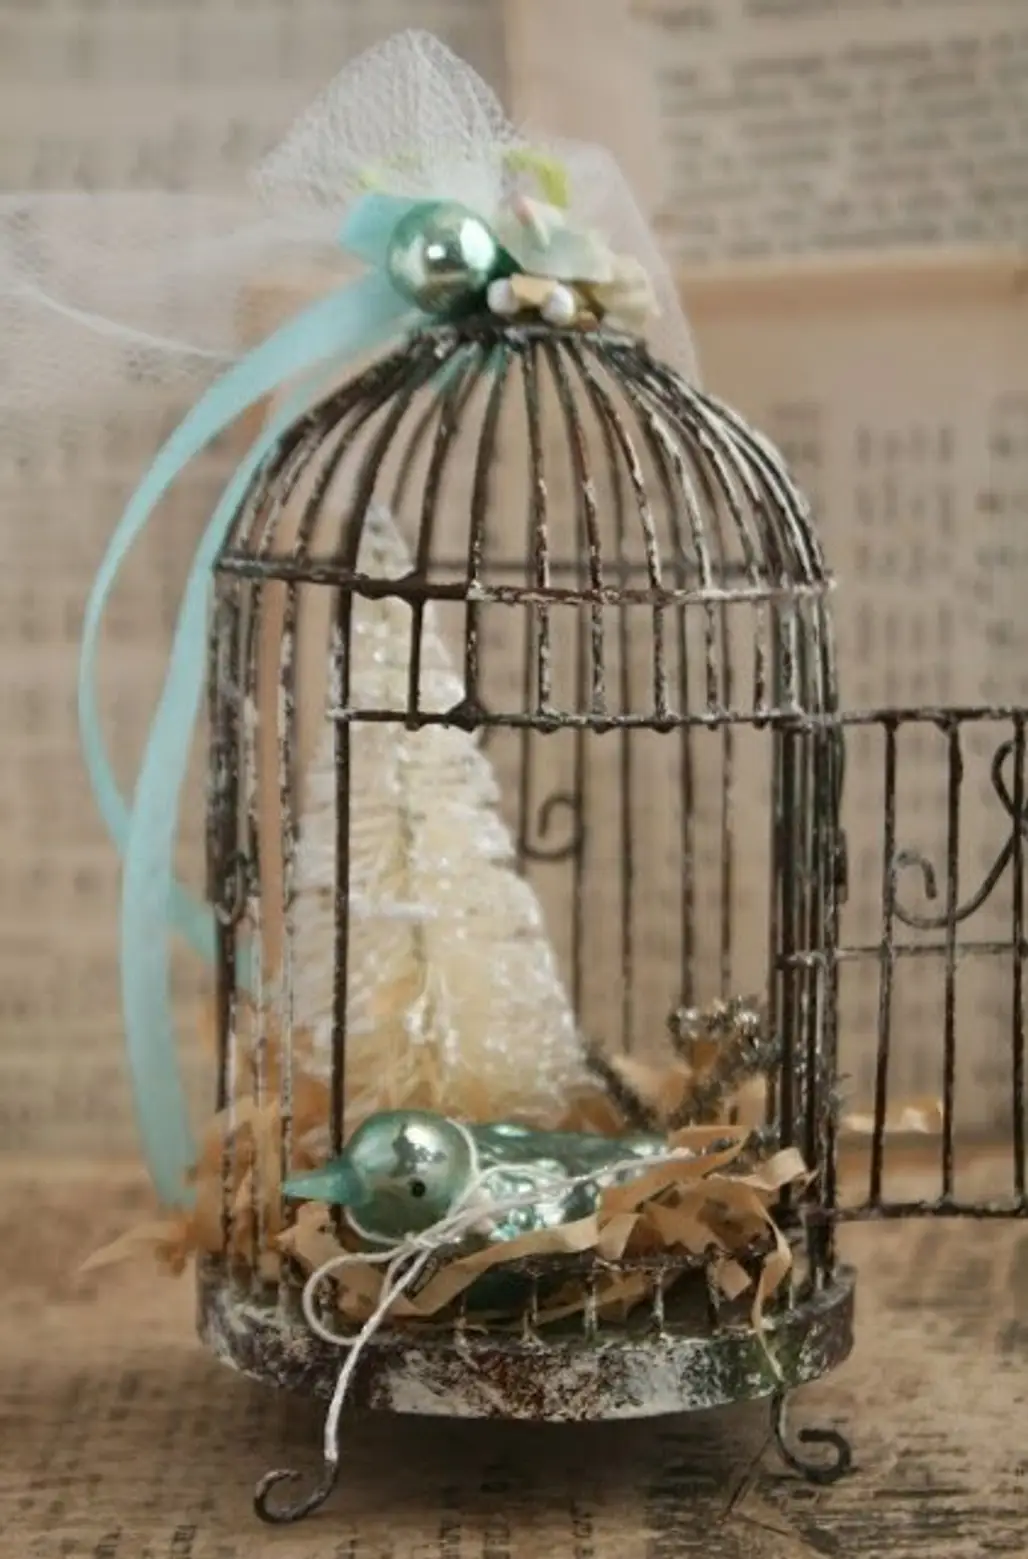 Decorating With Birdcages: 30 Creative Ideas